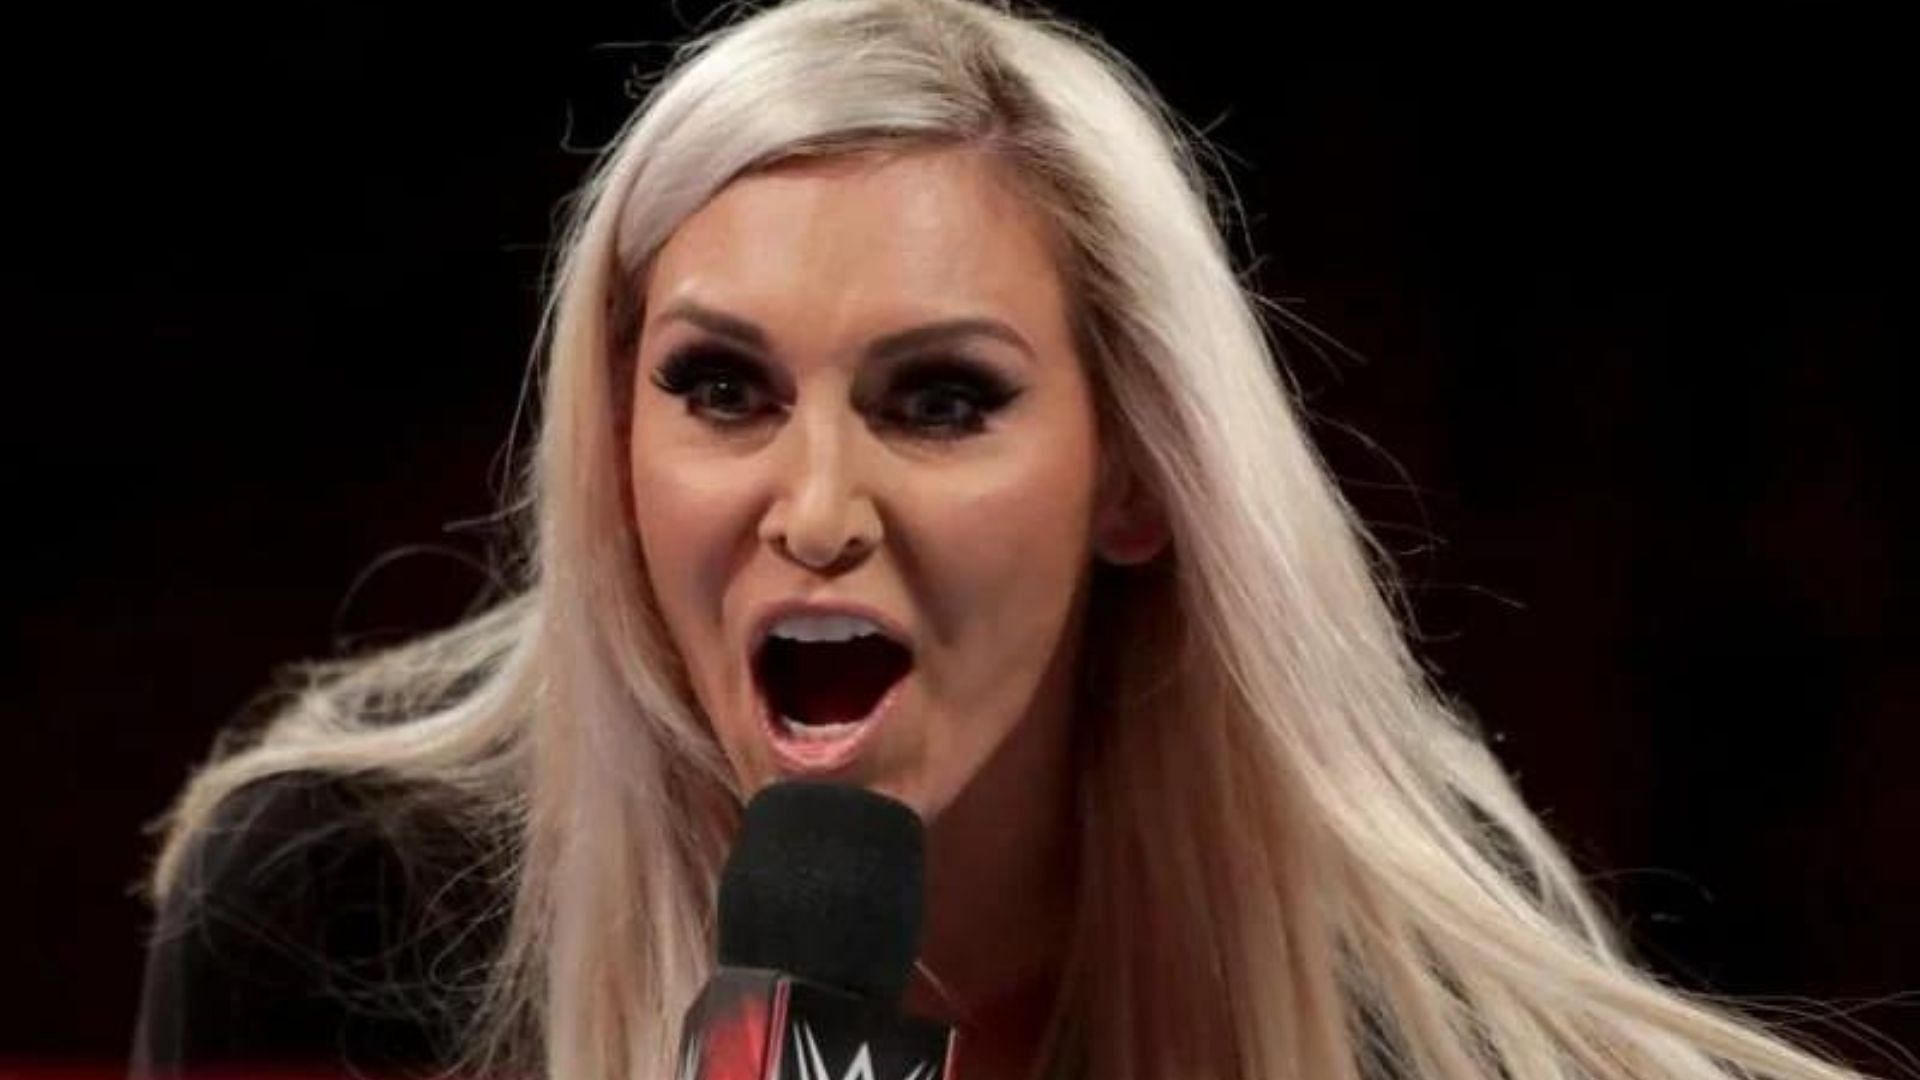 Charlotte Flair is currently absent from WWE TV